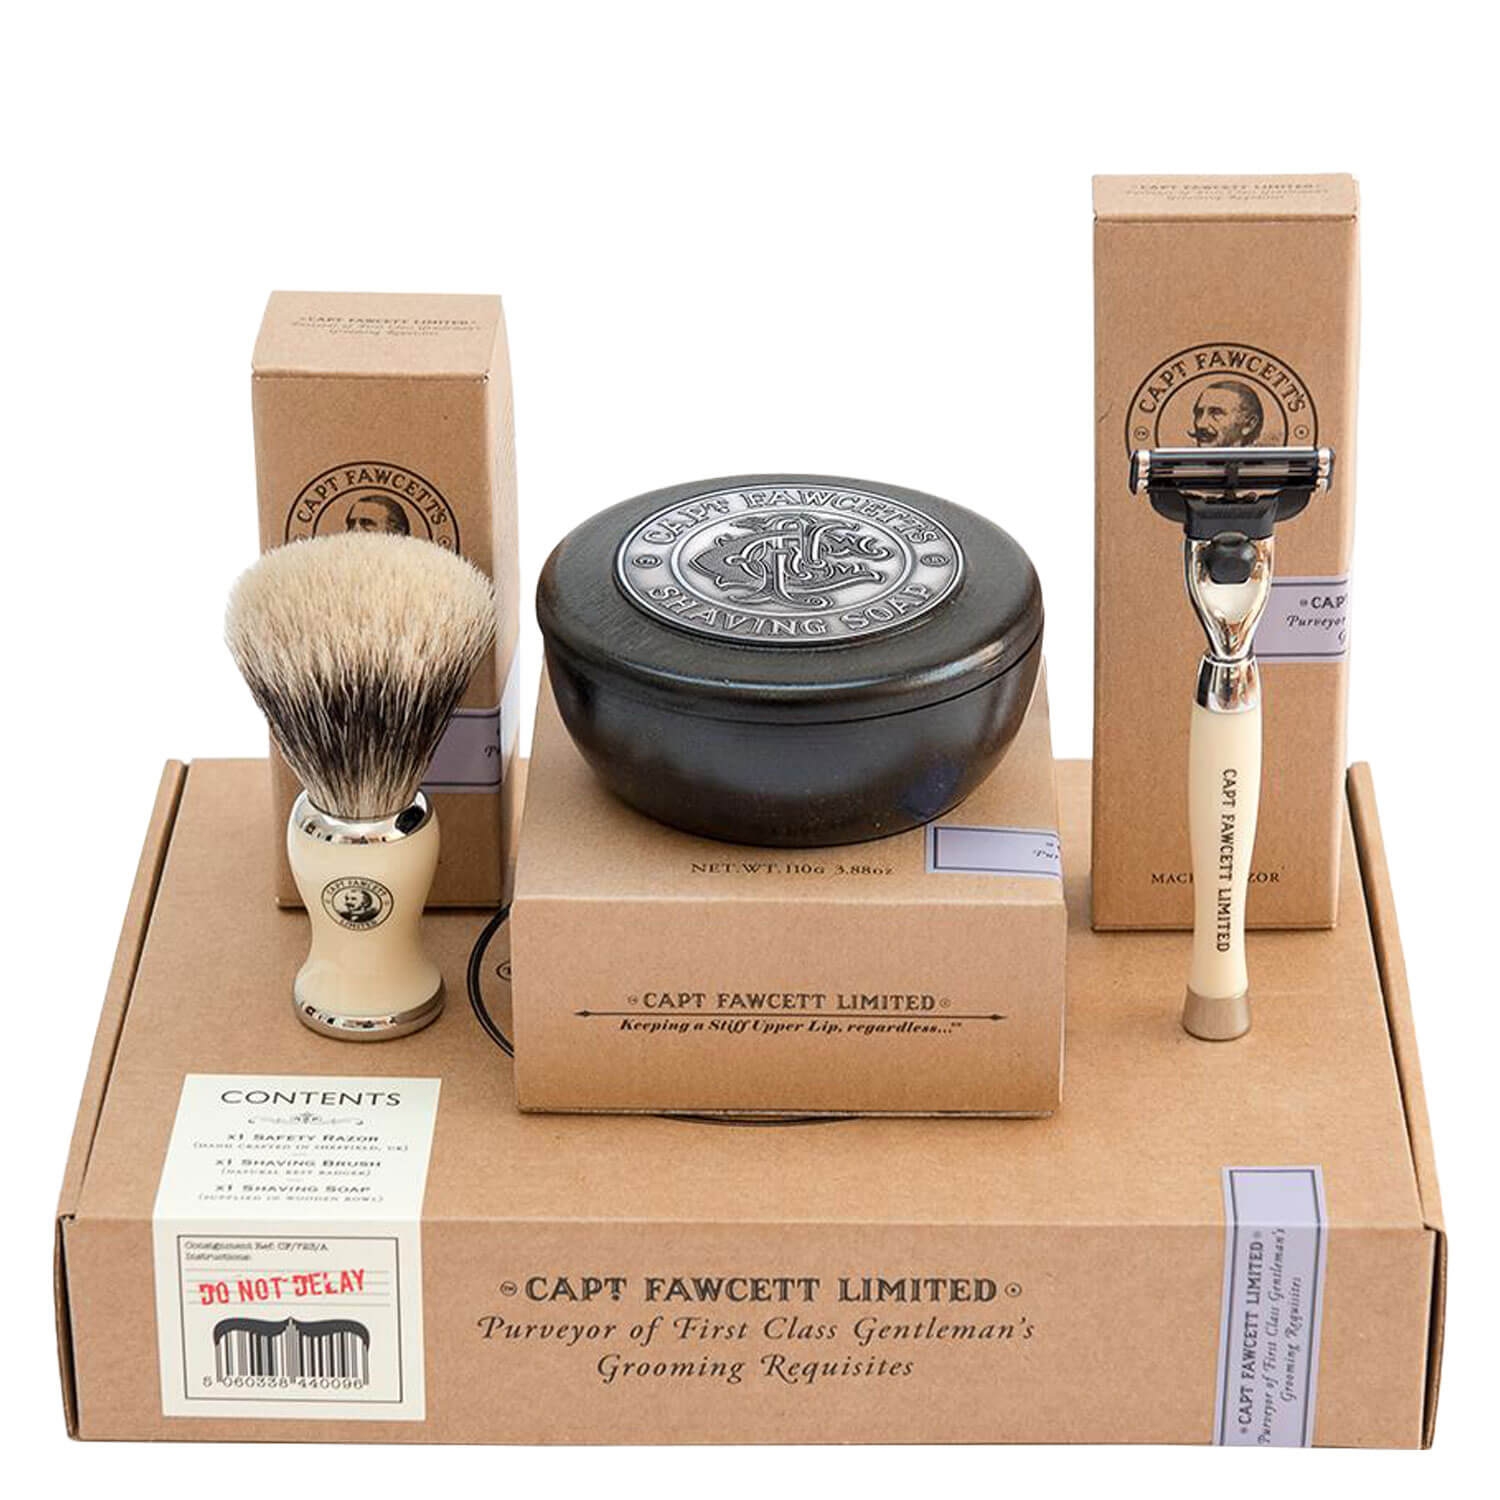 Product image from Capt. Fawcett Care - Shaving Set